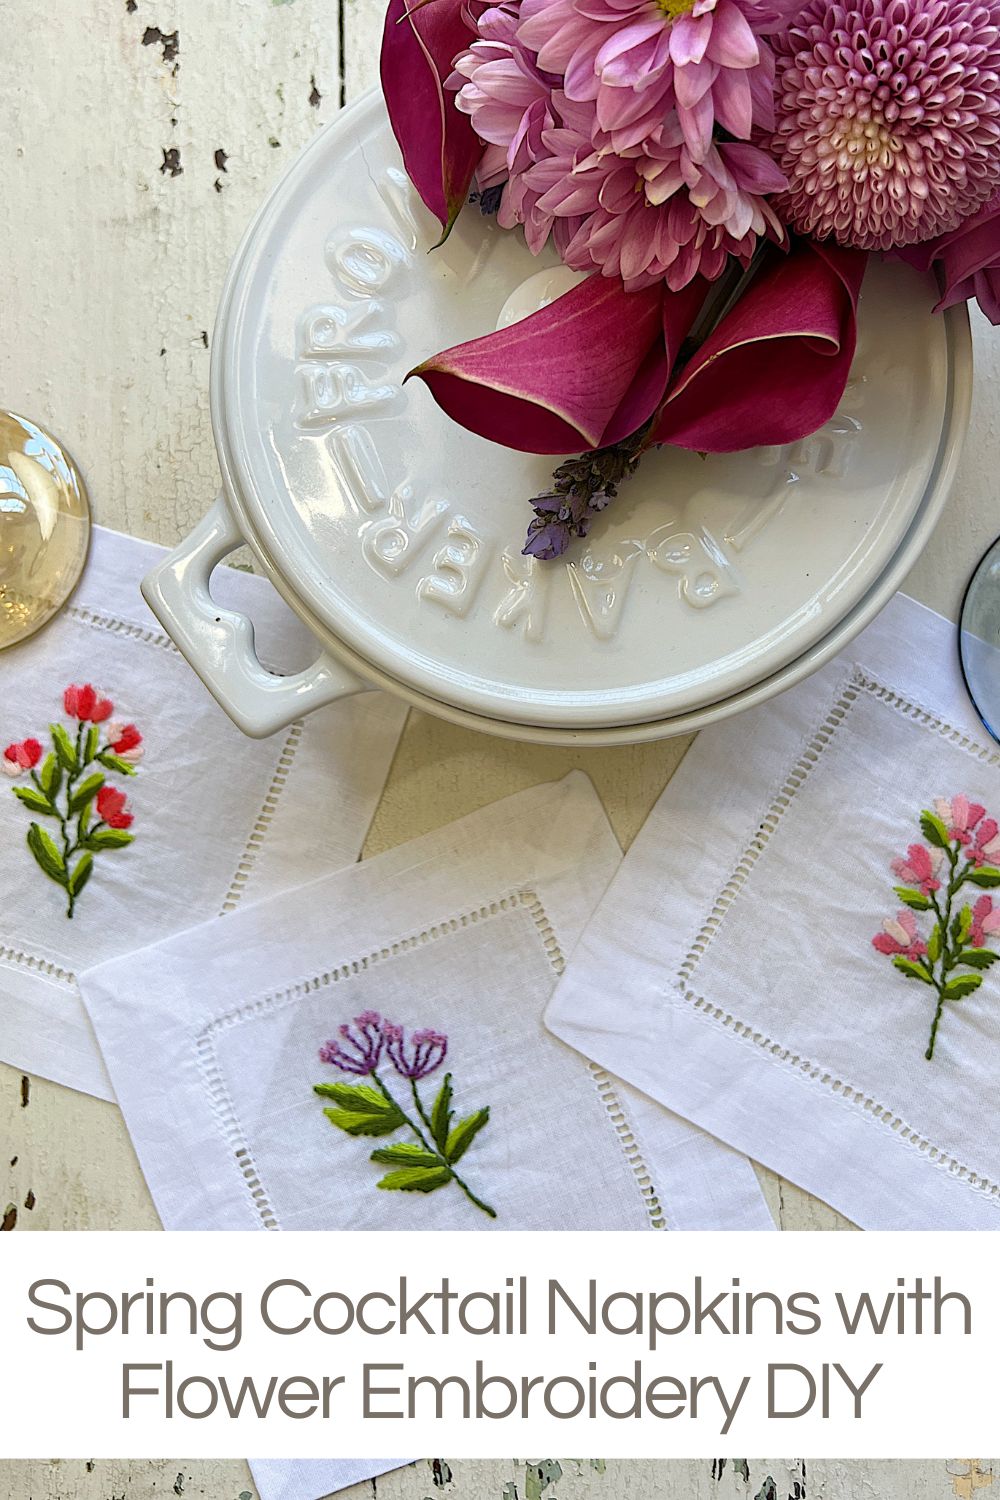 I am very excited about these DIY spring cocktail napkins with flower embroidery. They are the perfect budget-friendly spring craft.